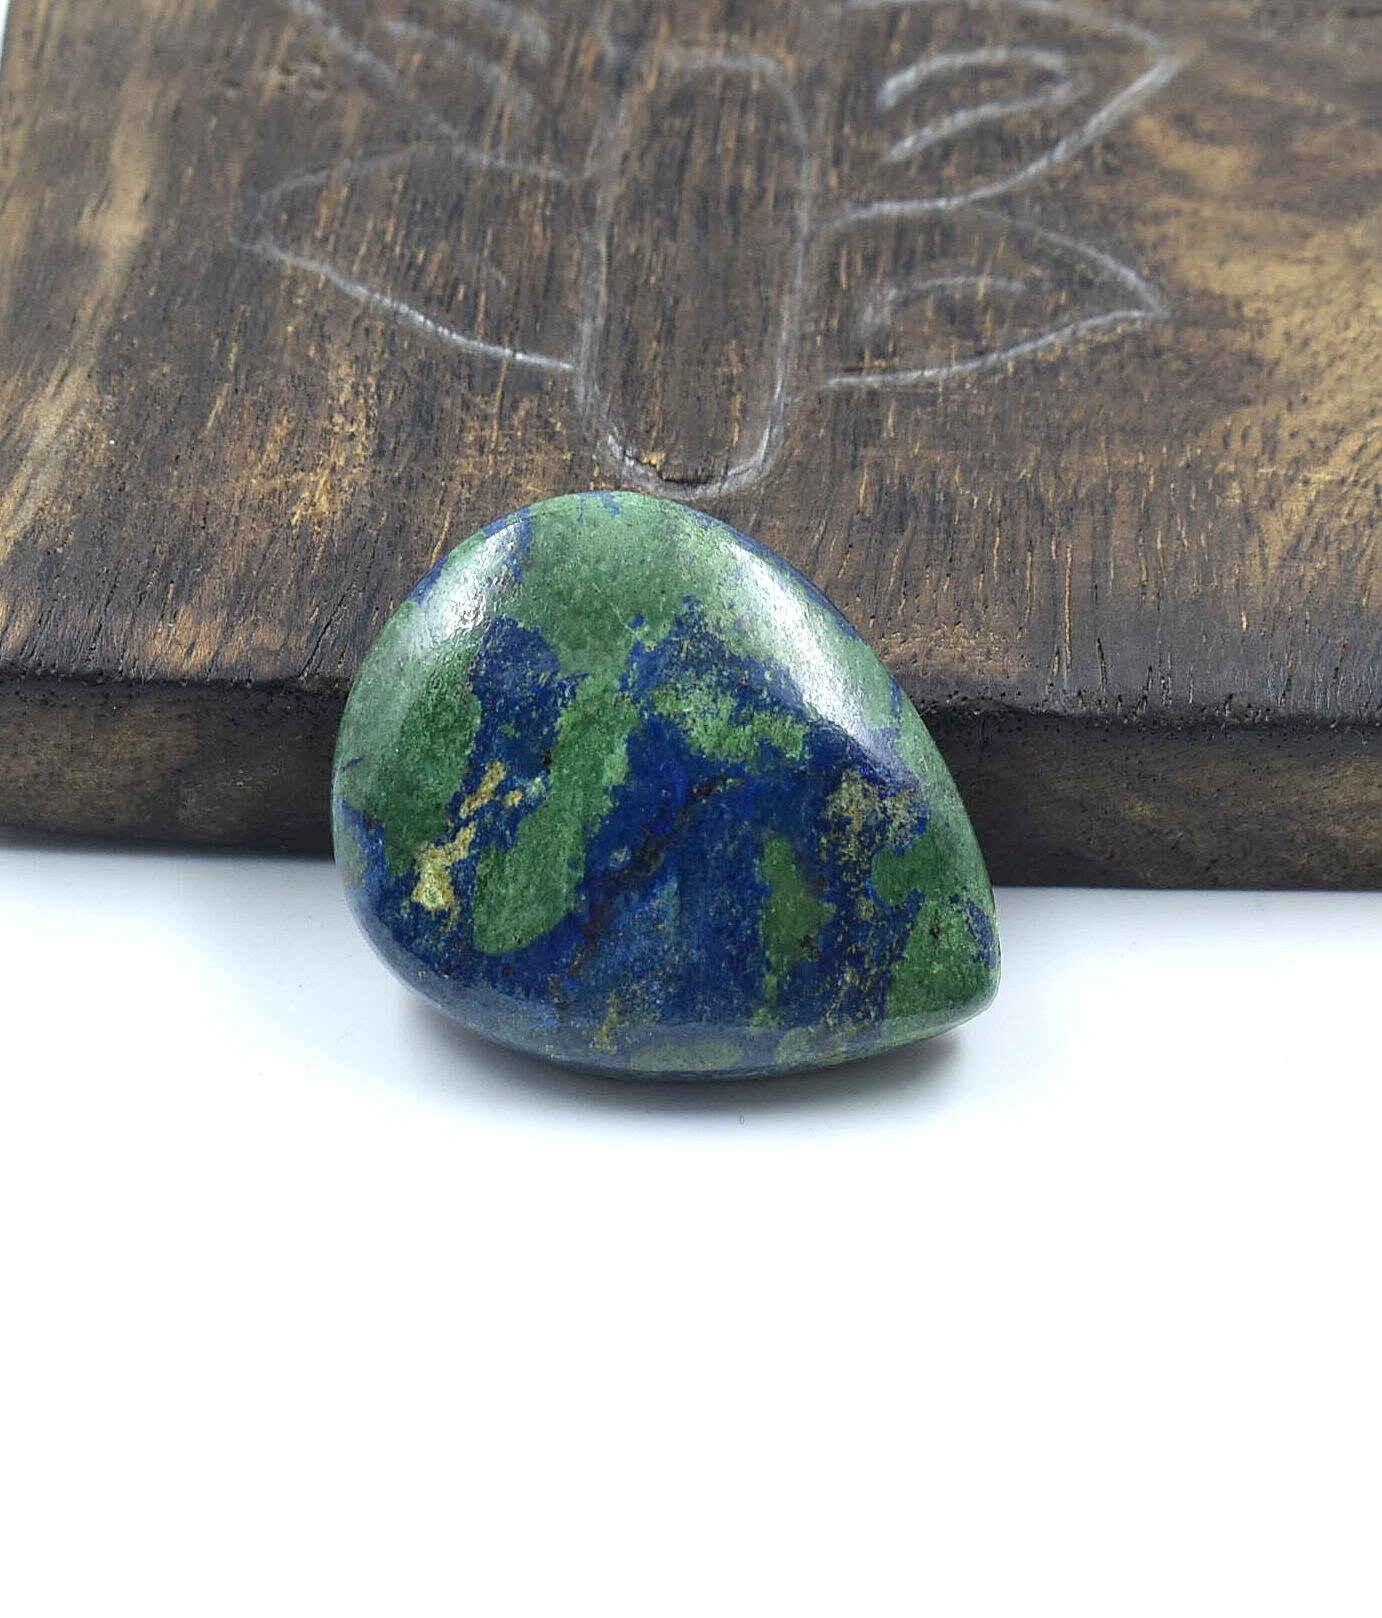 100% Natural Azurite Malachite Cabochon Good quality stone Beautiful Art Making for jewellery Ring 45.95 CARAT 28X22 MM | Save 33% - Rajasthan Living 14